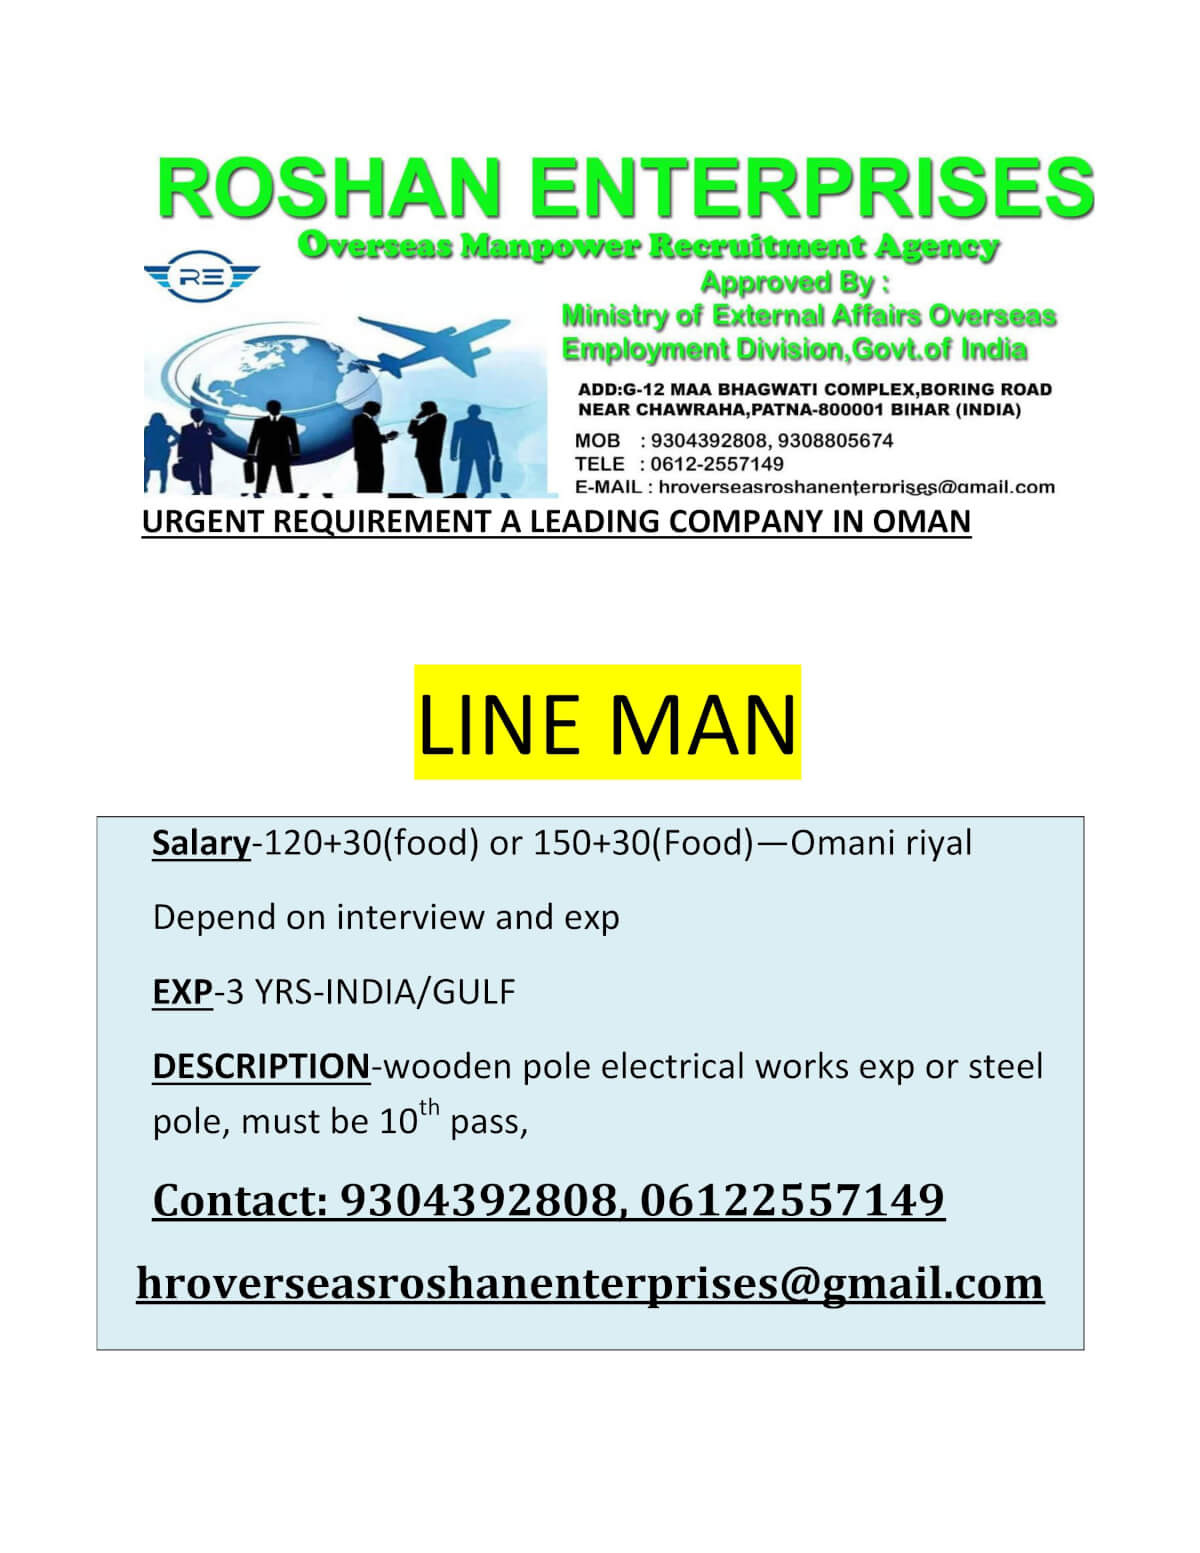 urgent requirement for a reputed Company  LINE MAN FOR OMAN